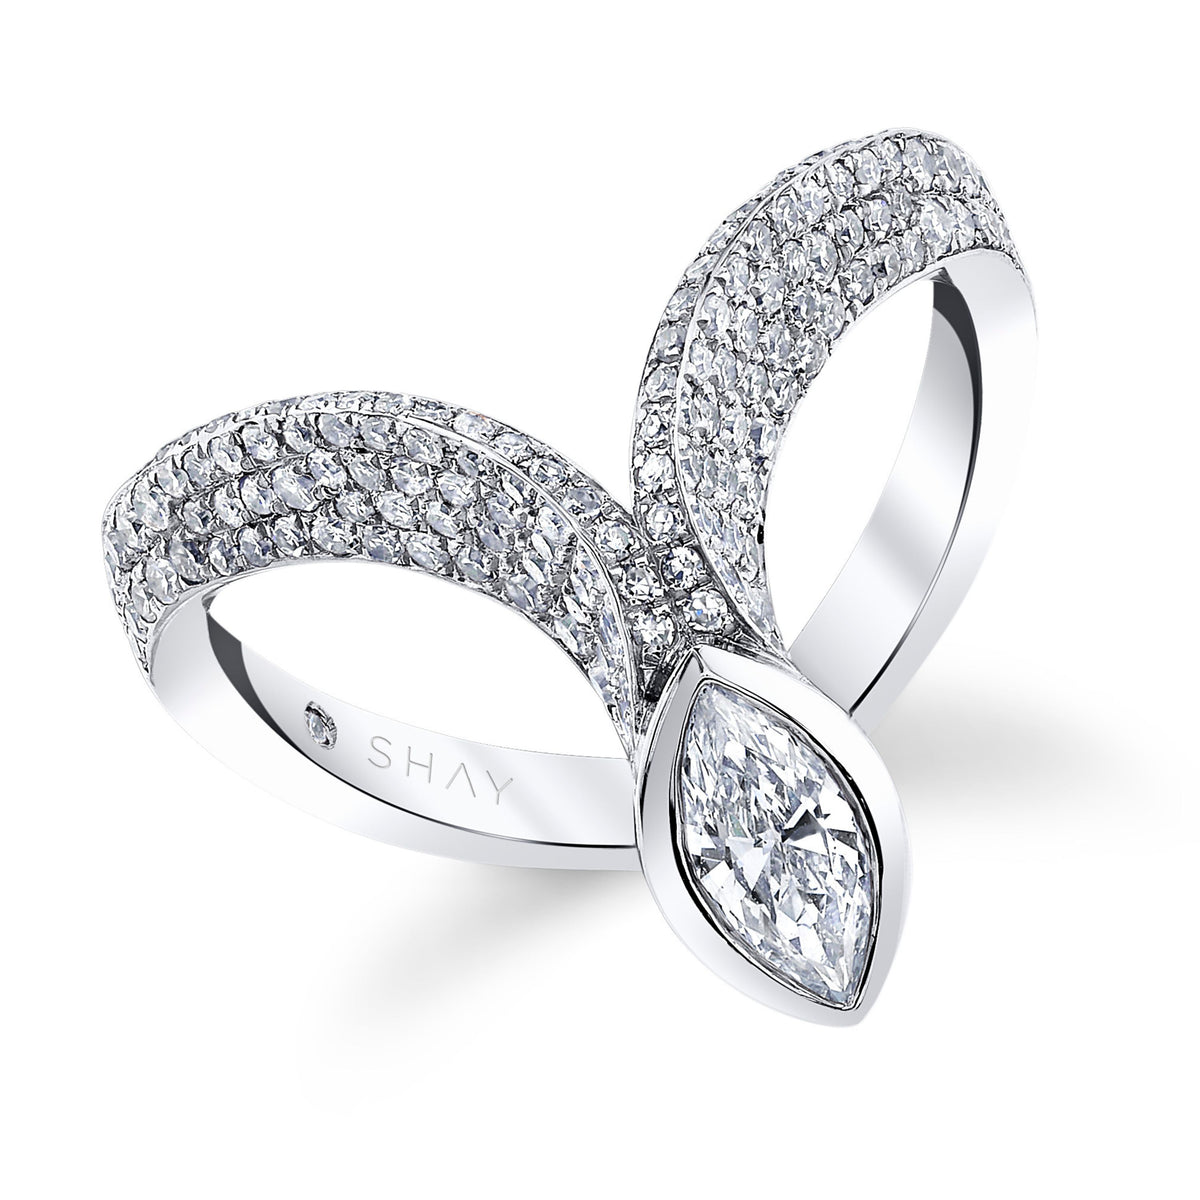 DIAMOND WINGED MARQUISE RING